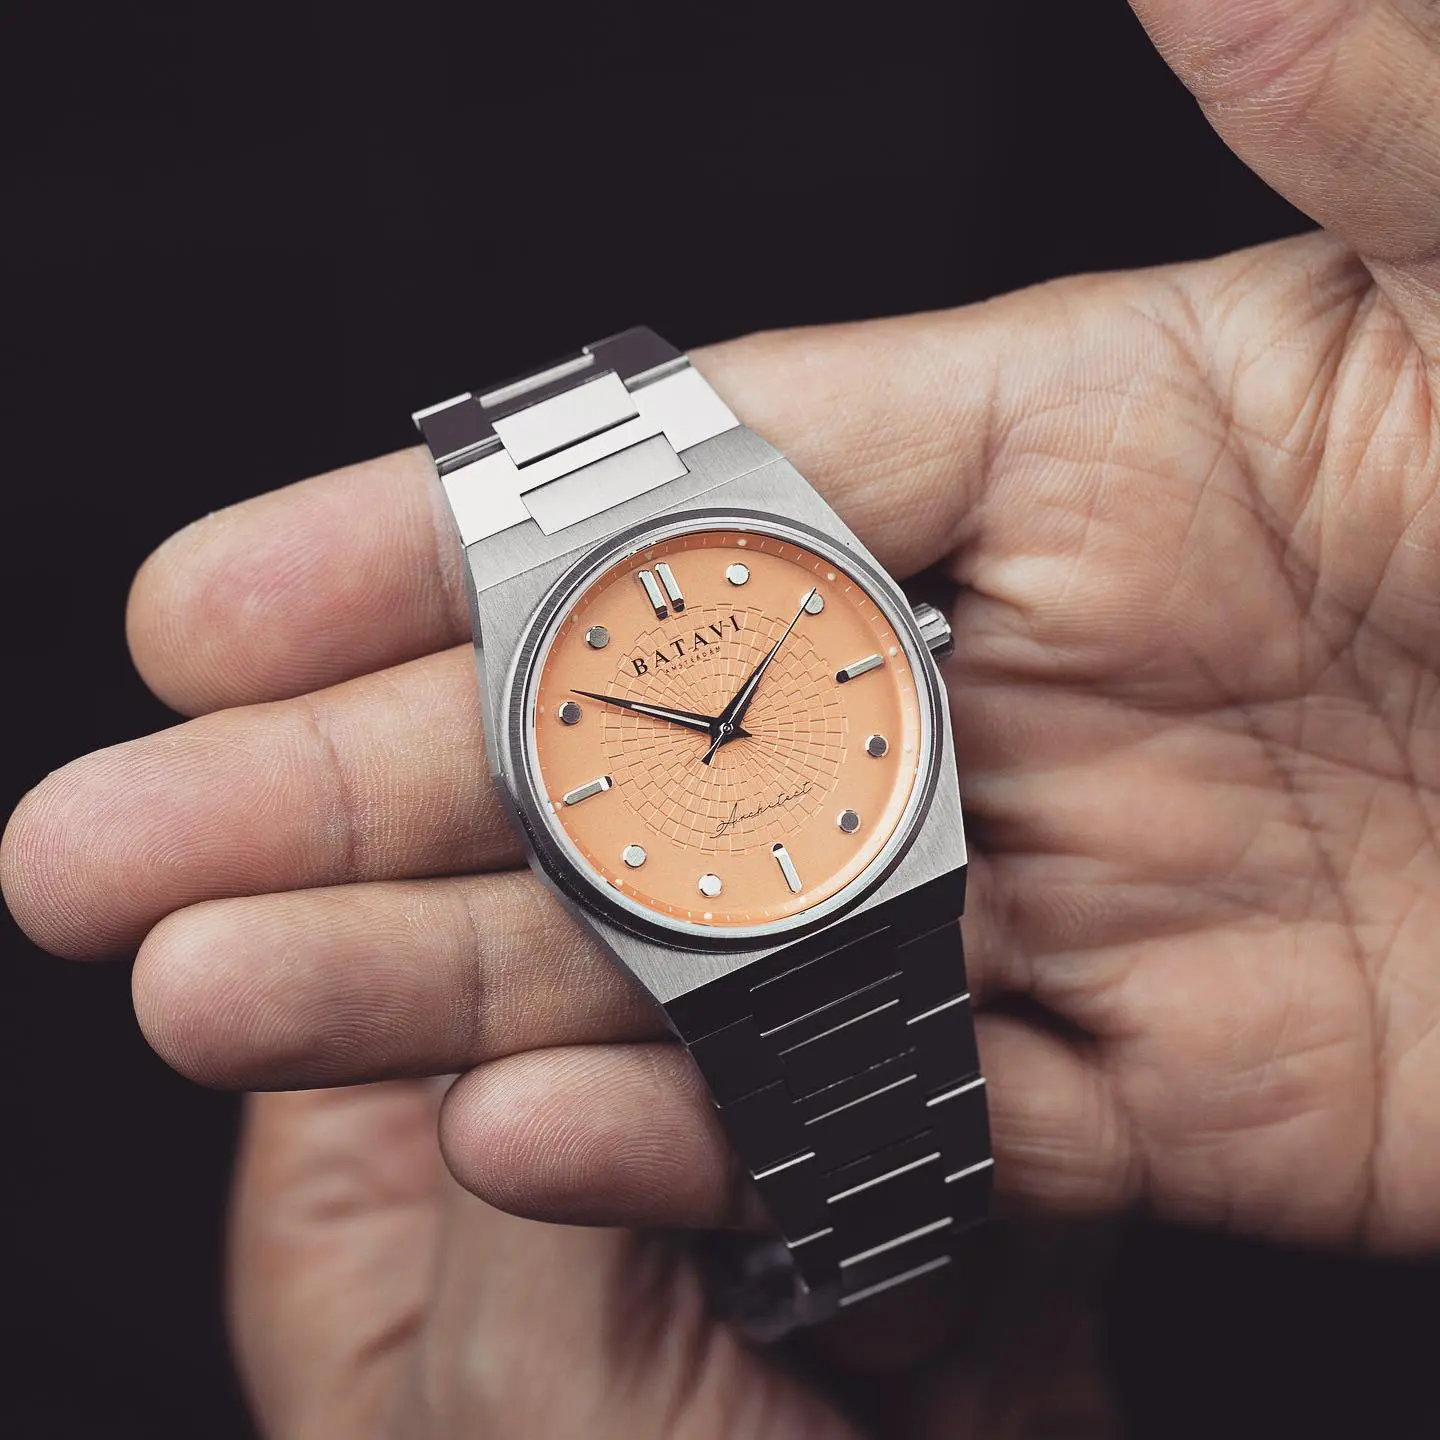 Batavi Watches Builds Upon Brand With Architect Series | aBlogtoWatch